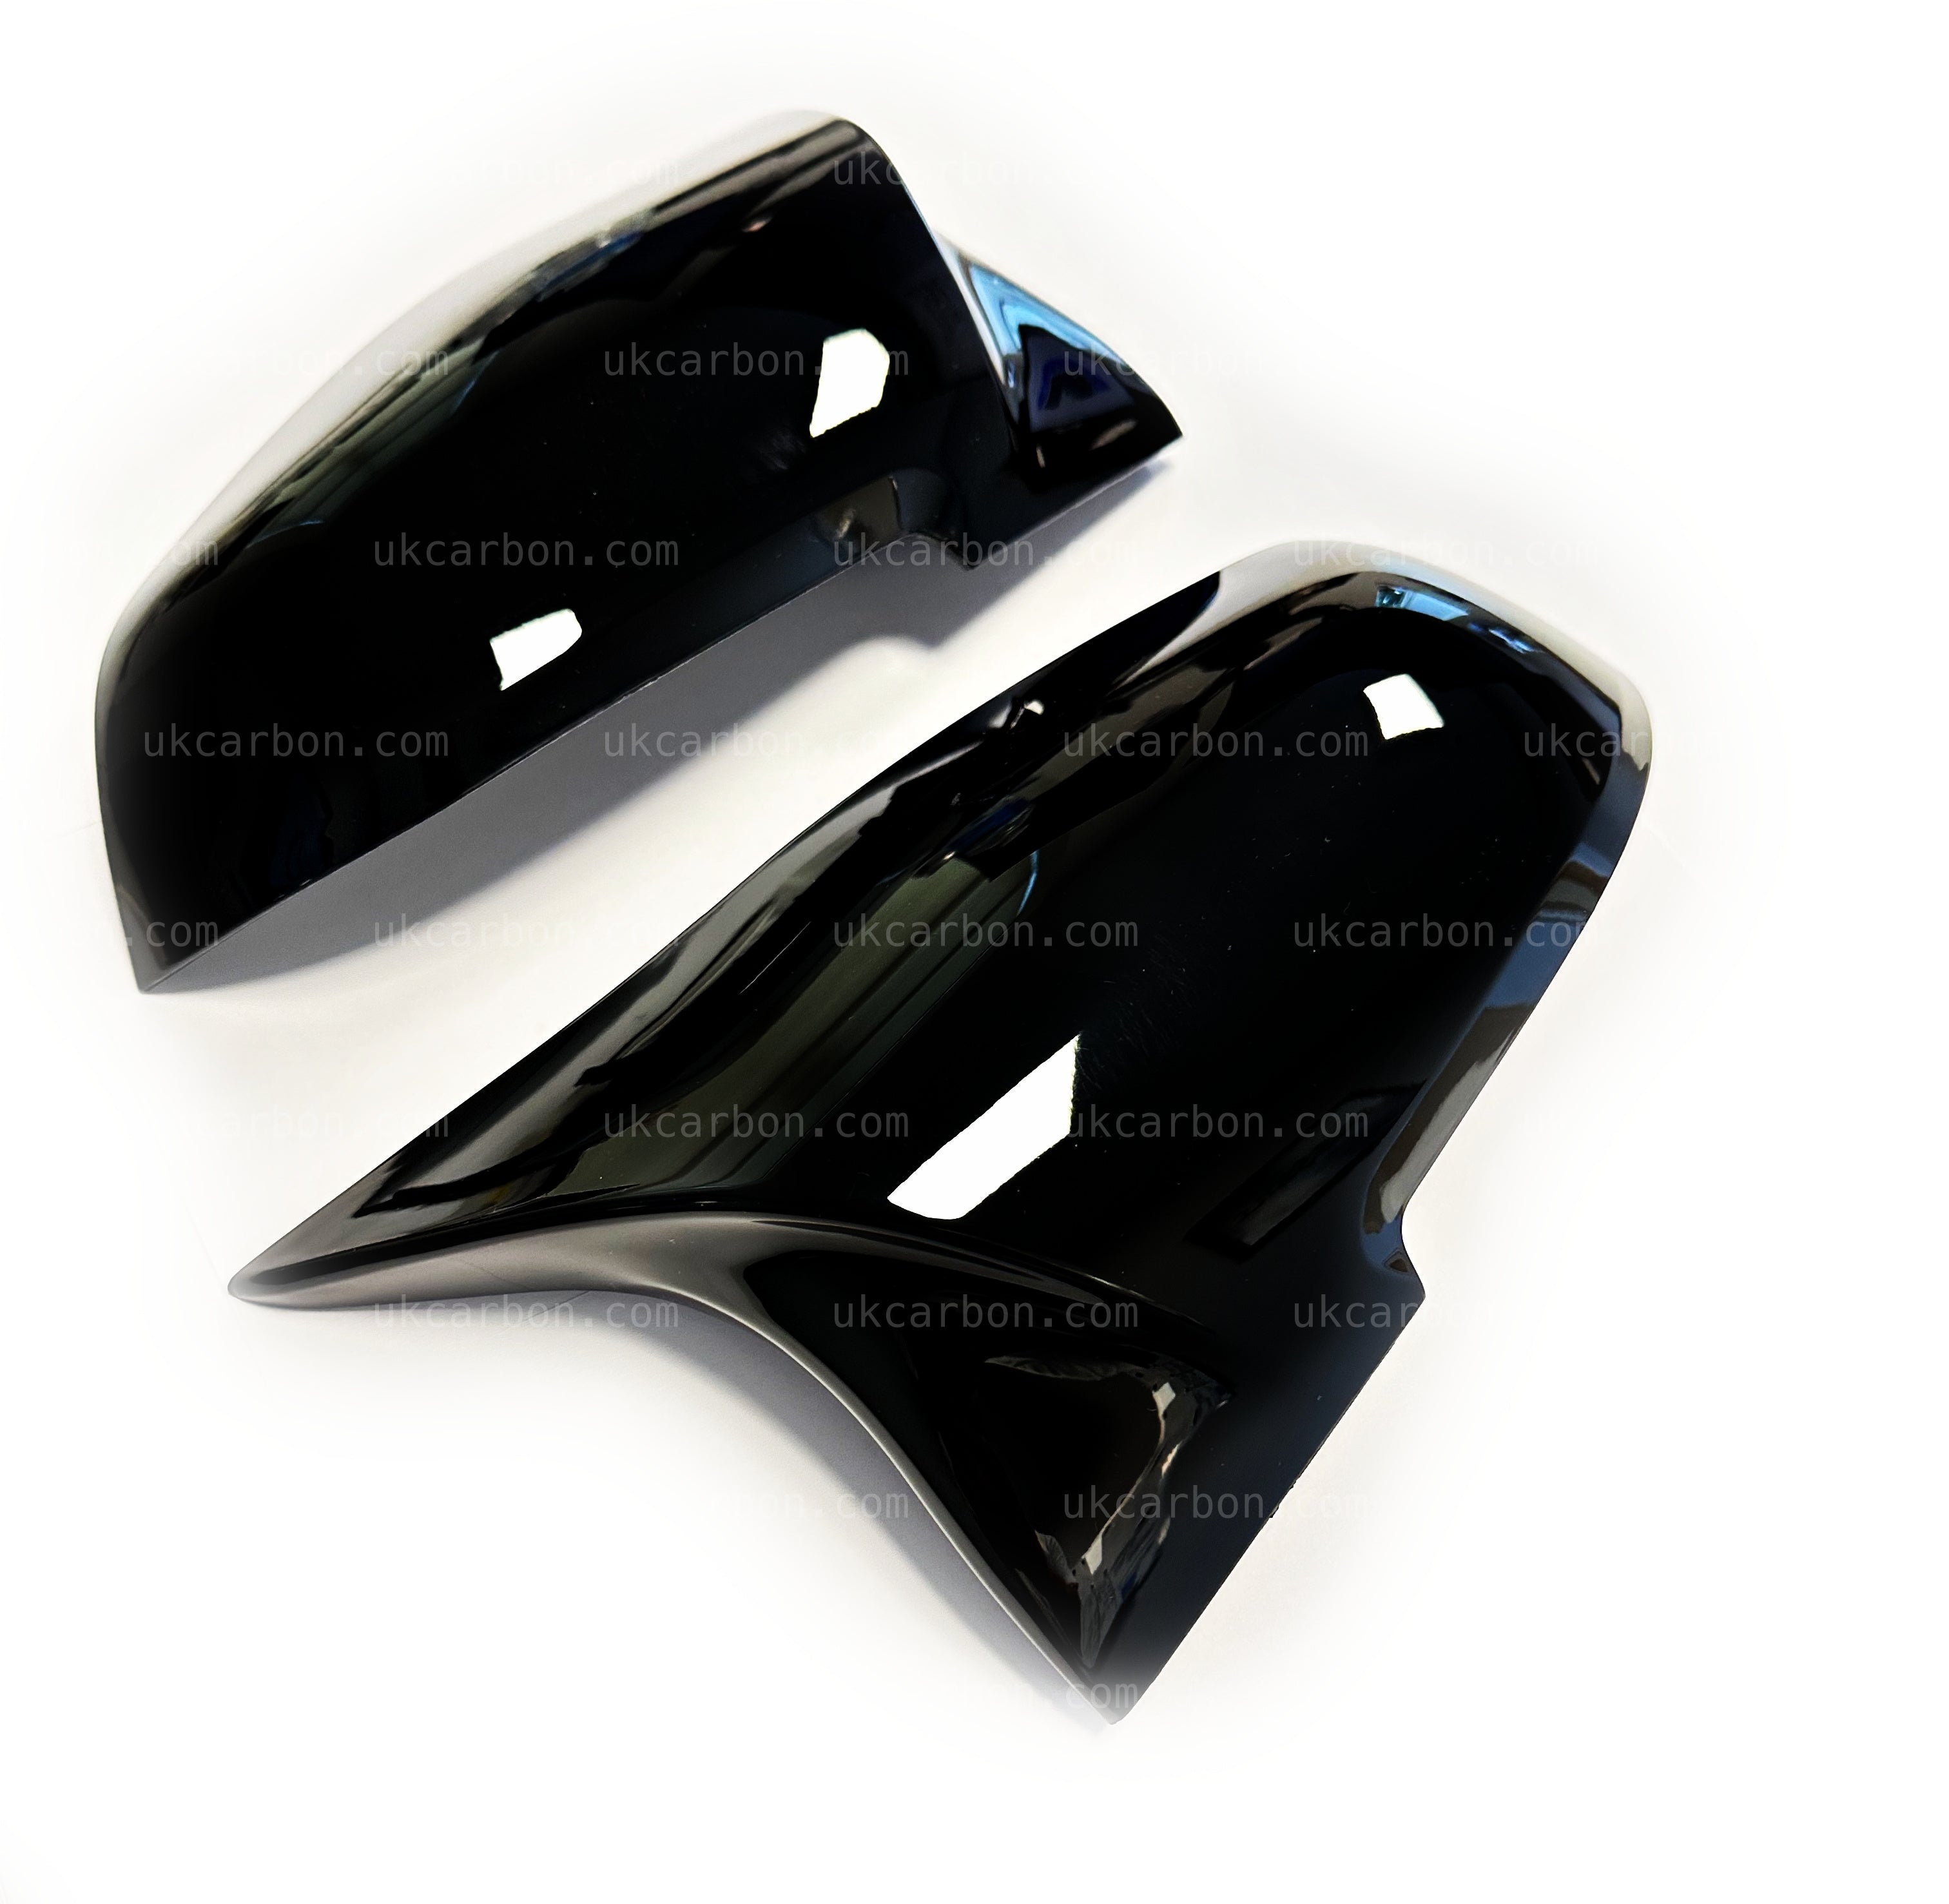 BMW 4 Series Gloss Black M Style Wing Mirror Cover Replacements F32 by UKCarbon